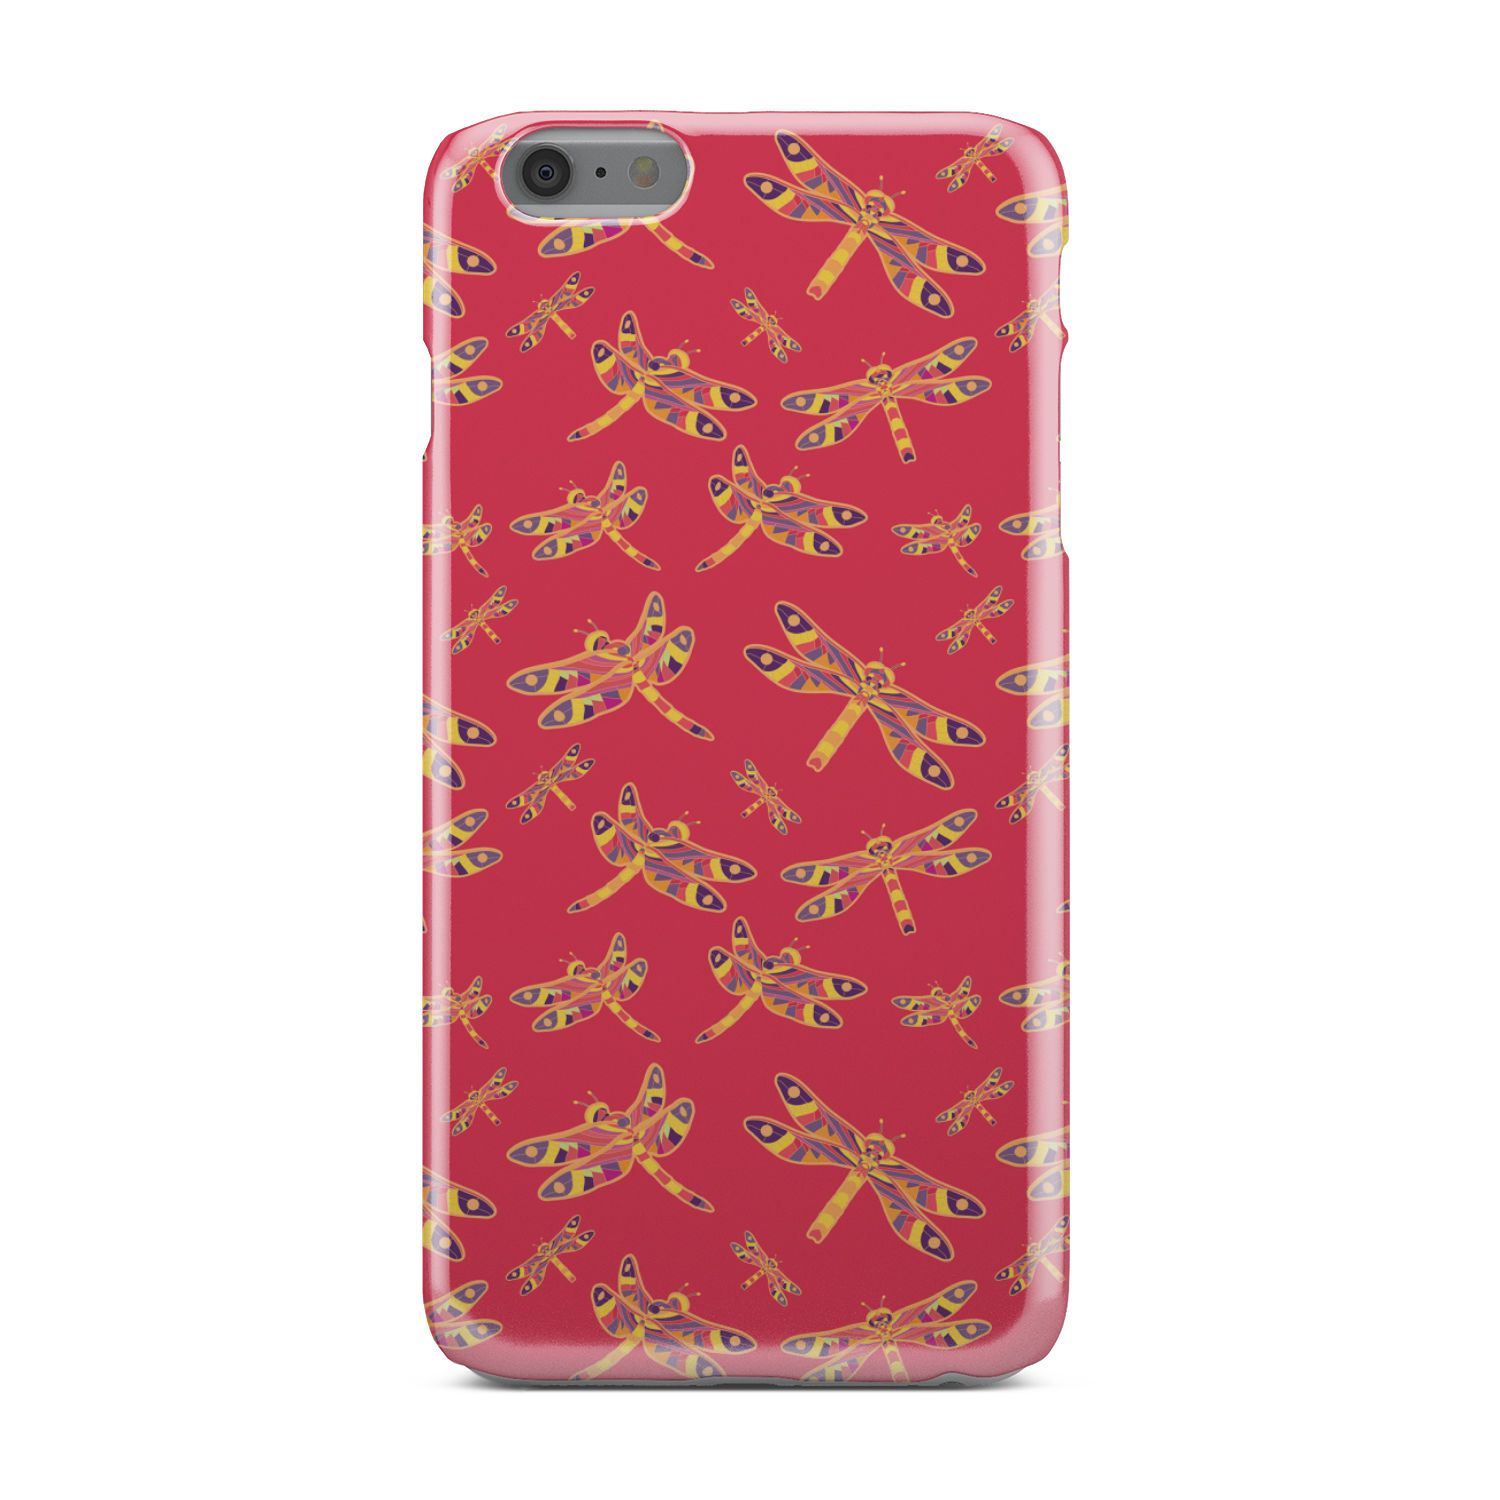 Gathering Rouge Phone Case Phone Case wc-fulfillment iPhone 6s Plus 